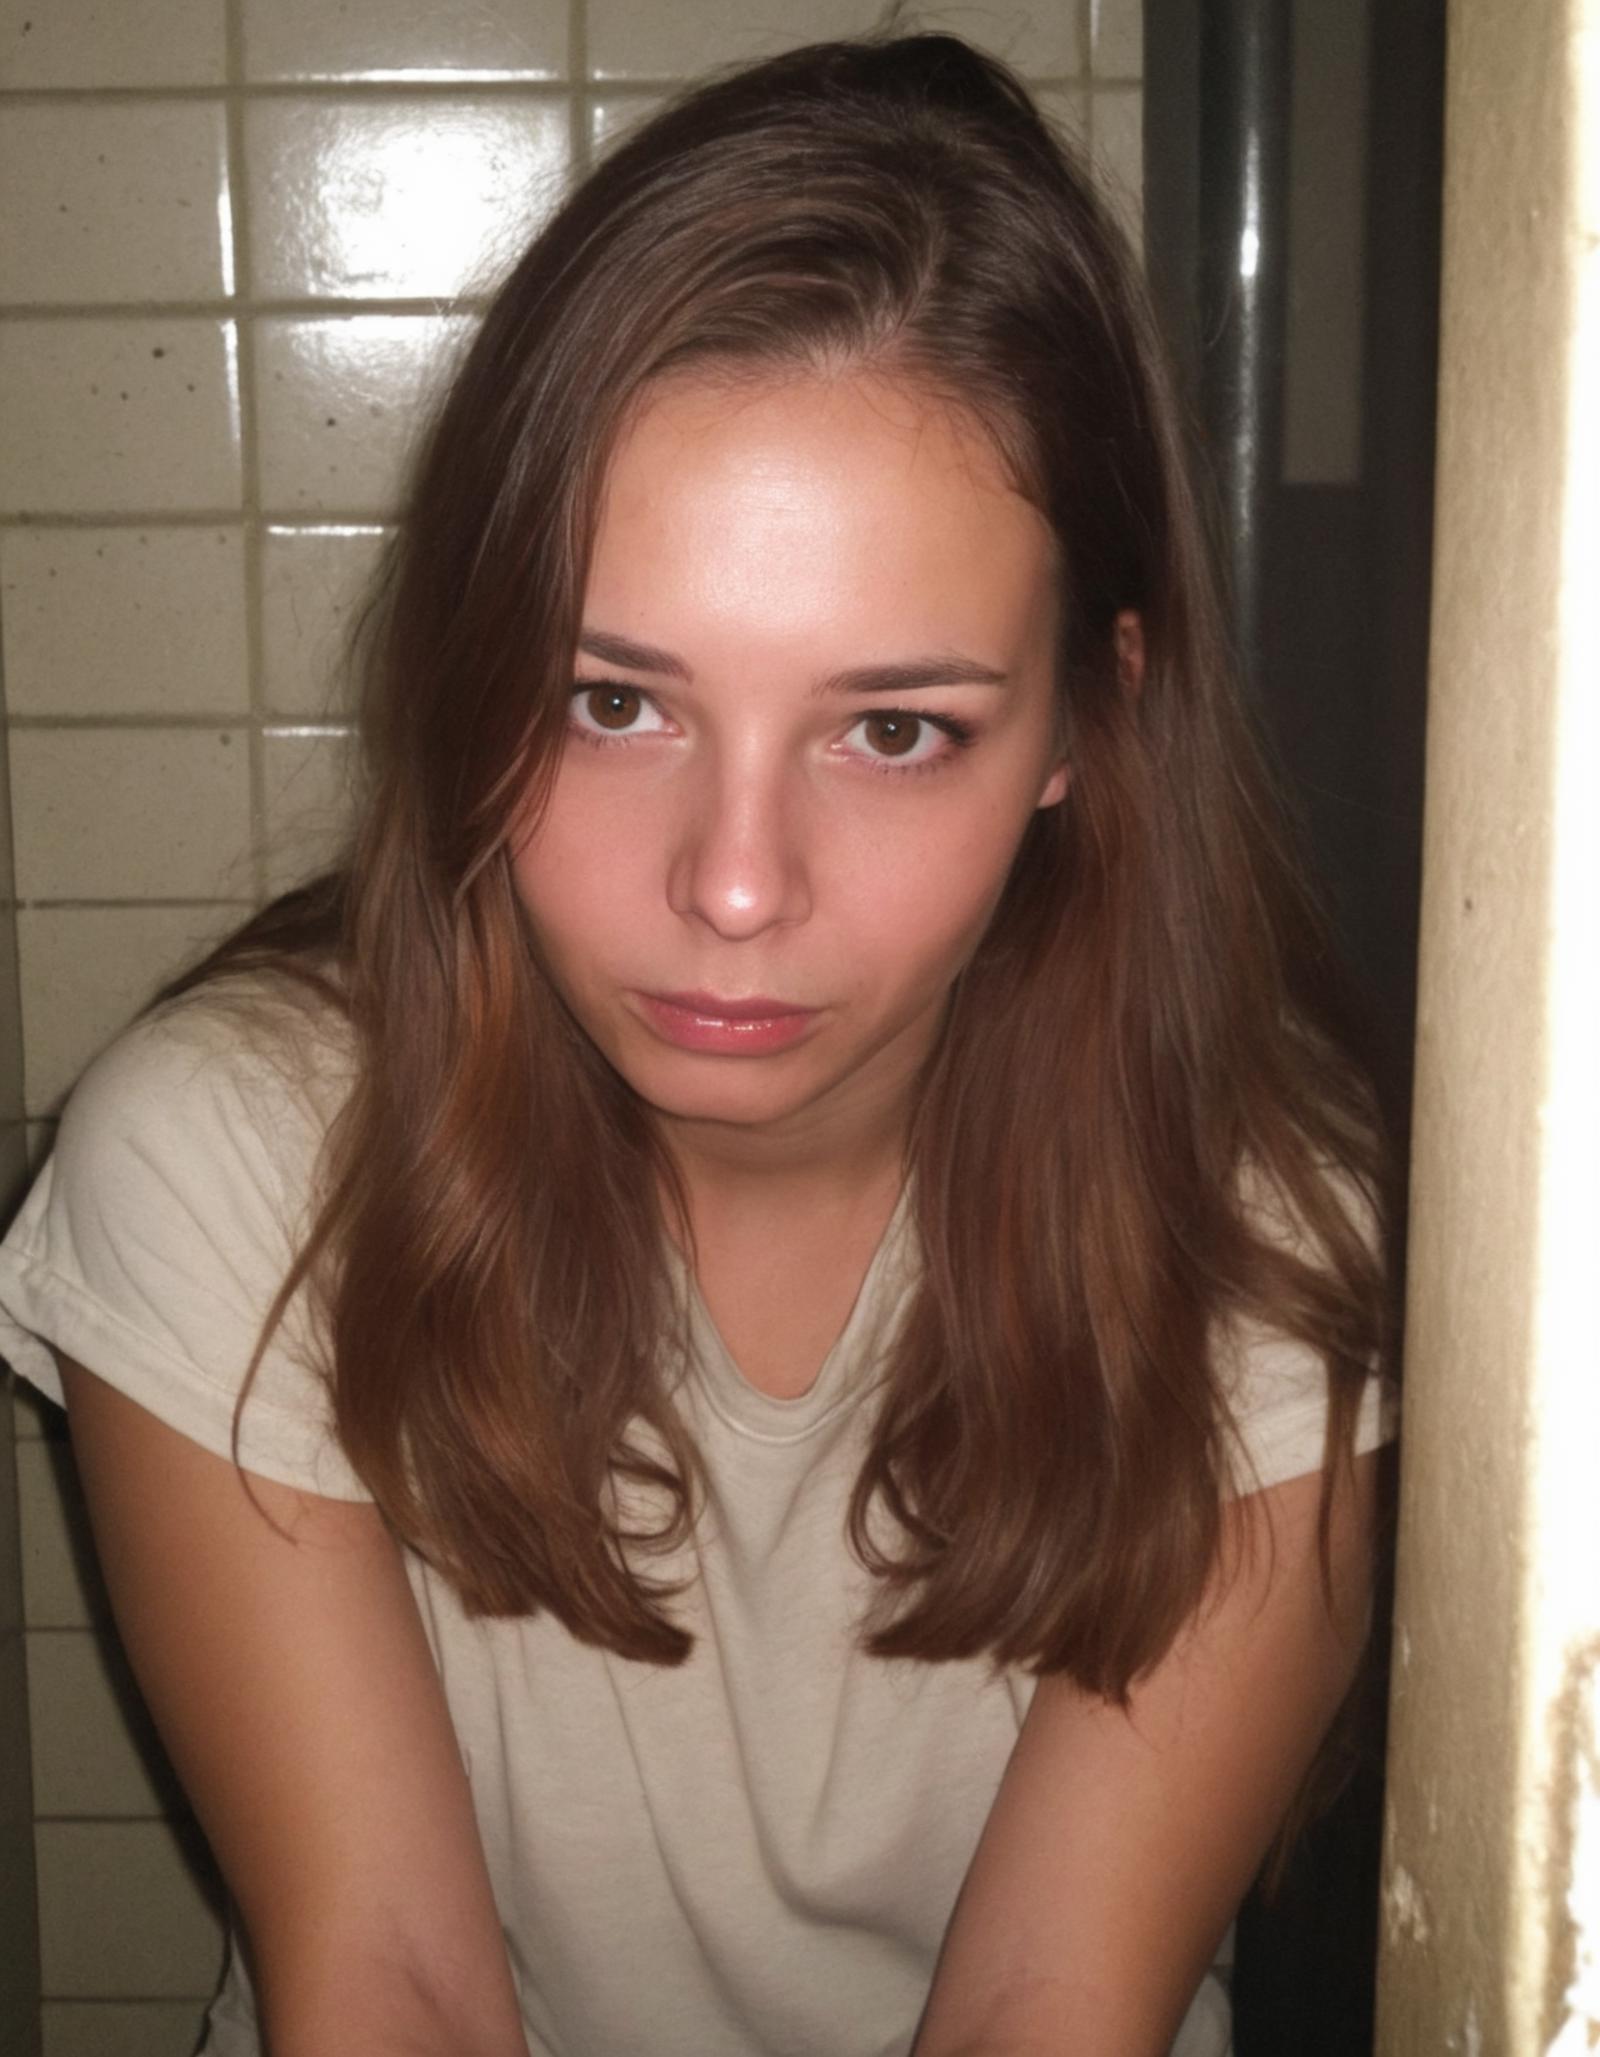 A young woman with brown hair and a white shirt, looking serious.